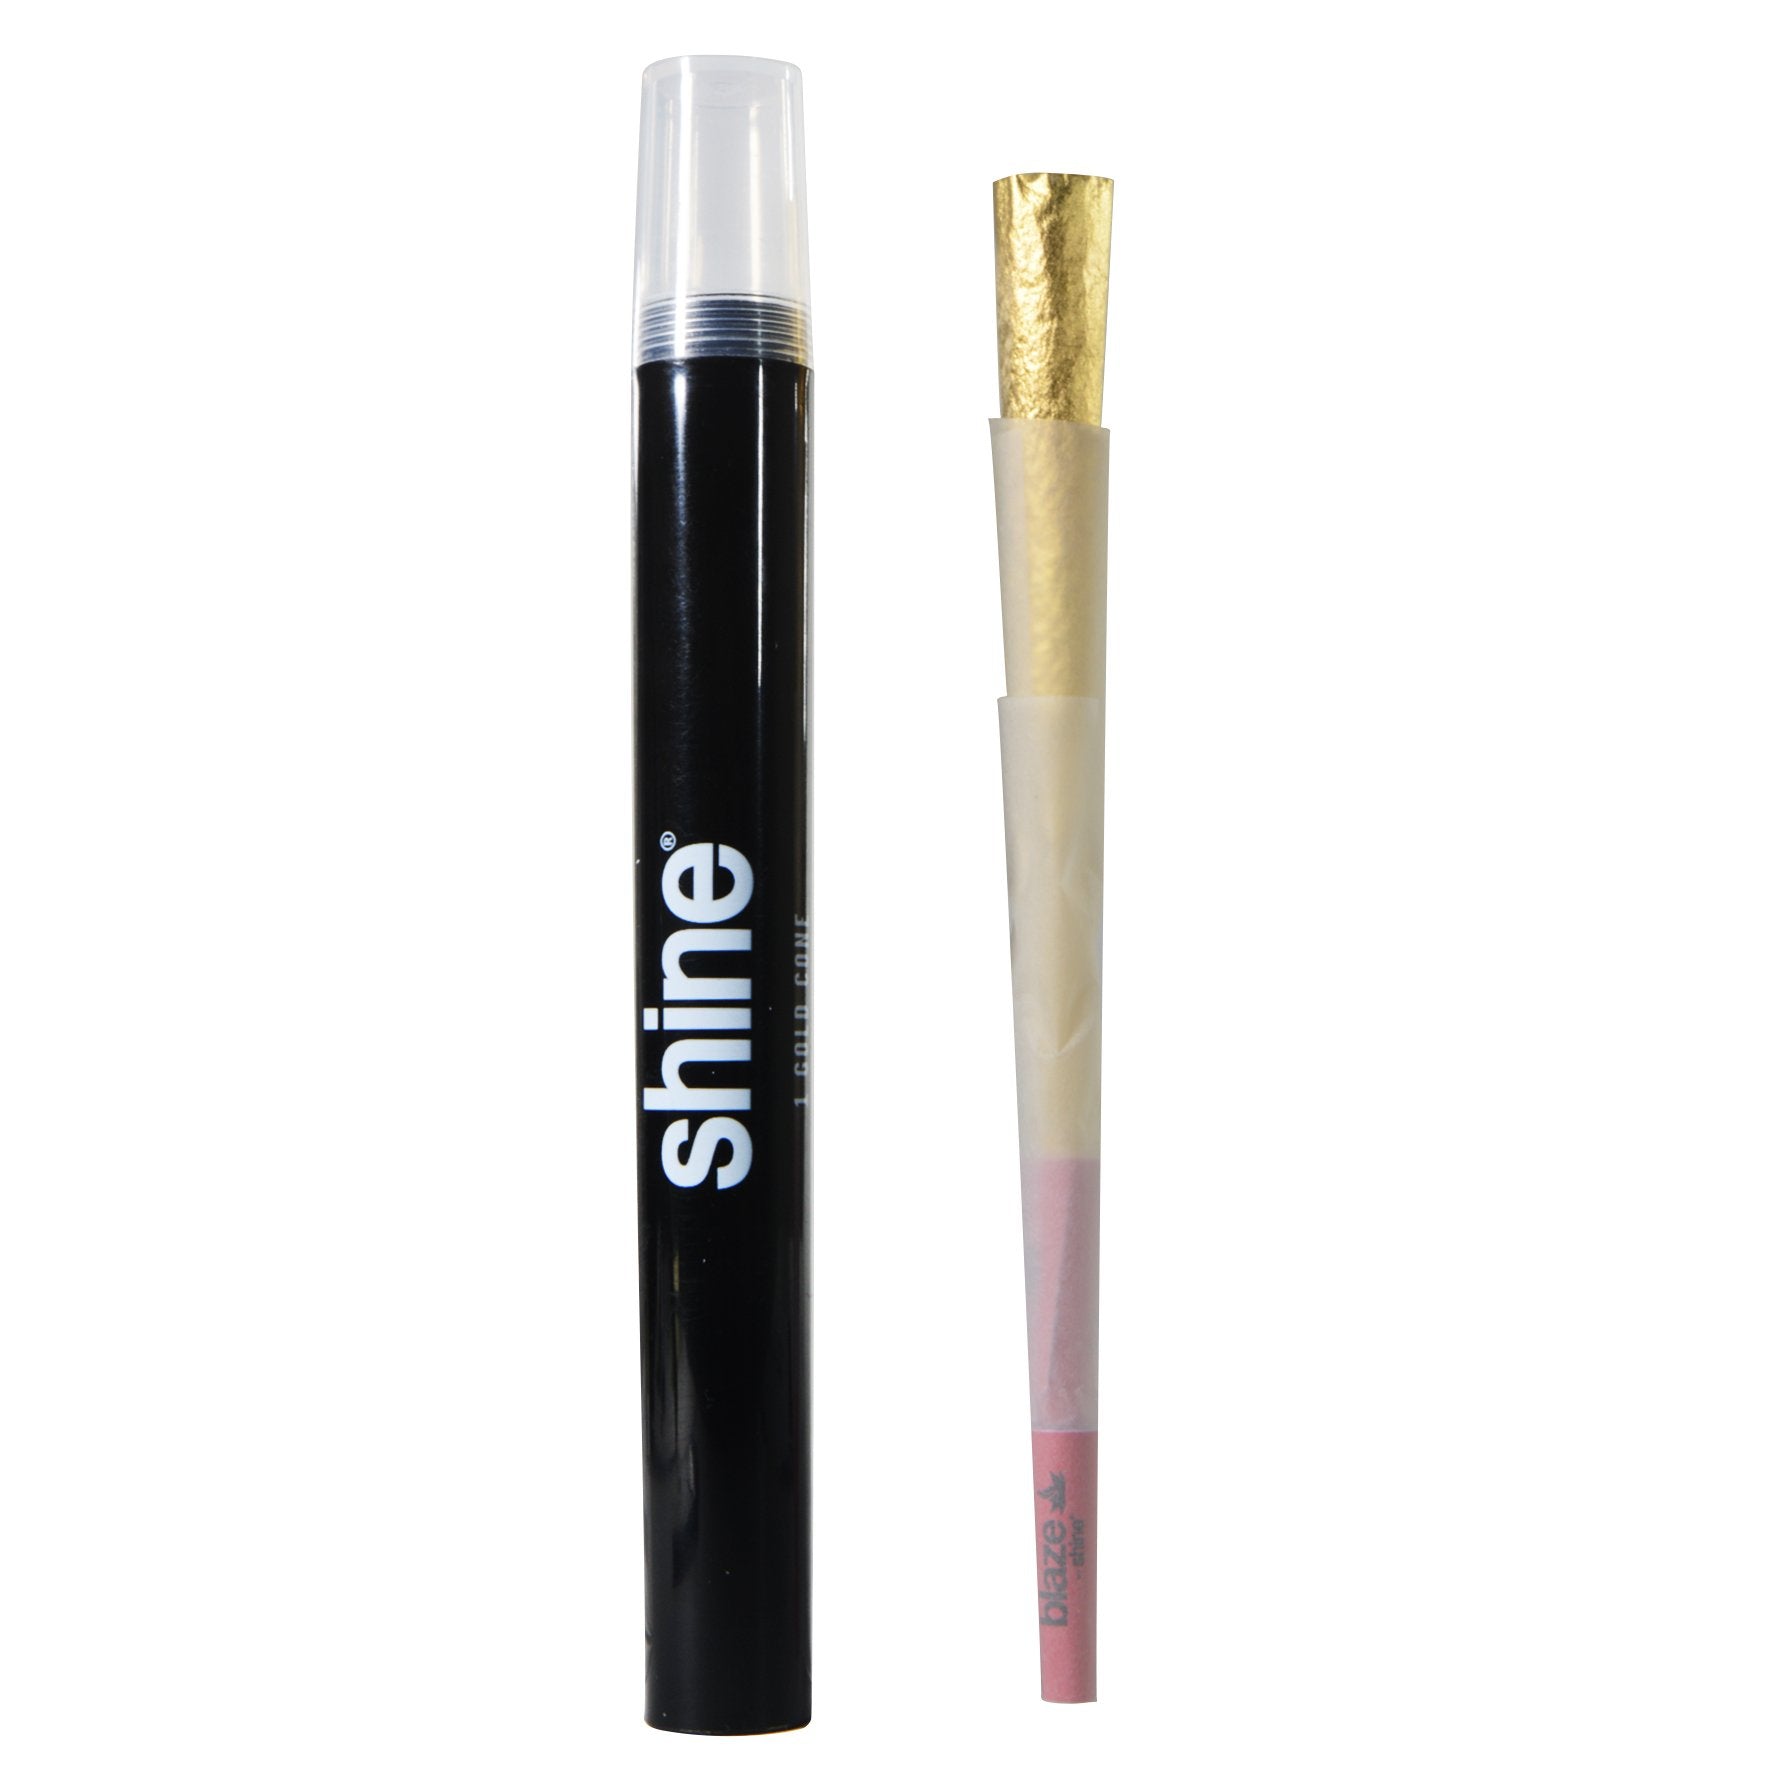 SHINE | 24K Gold Midas King Size Pre-Rolled Cone | 98mm - Edible Gold - 1 Count - 1